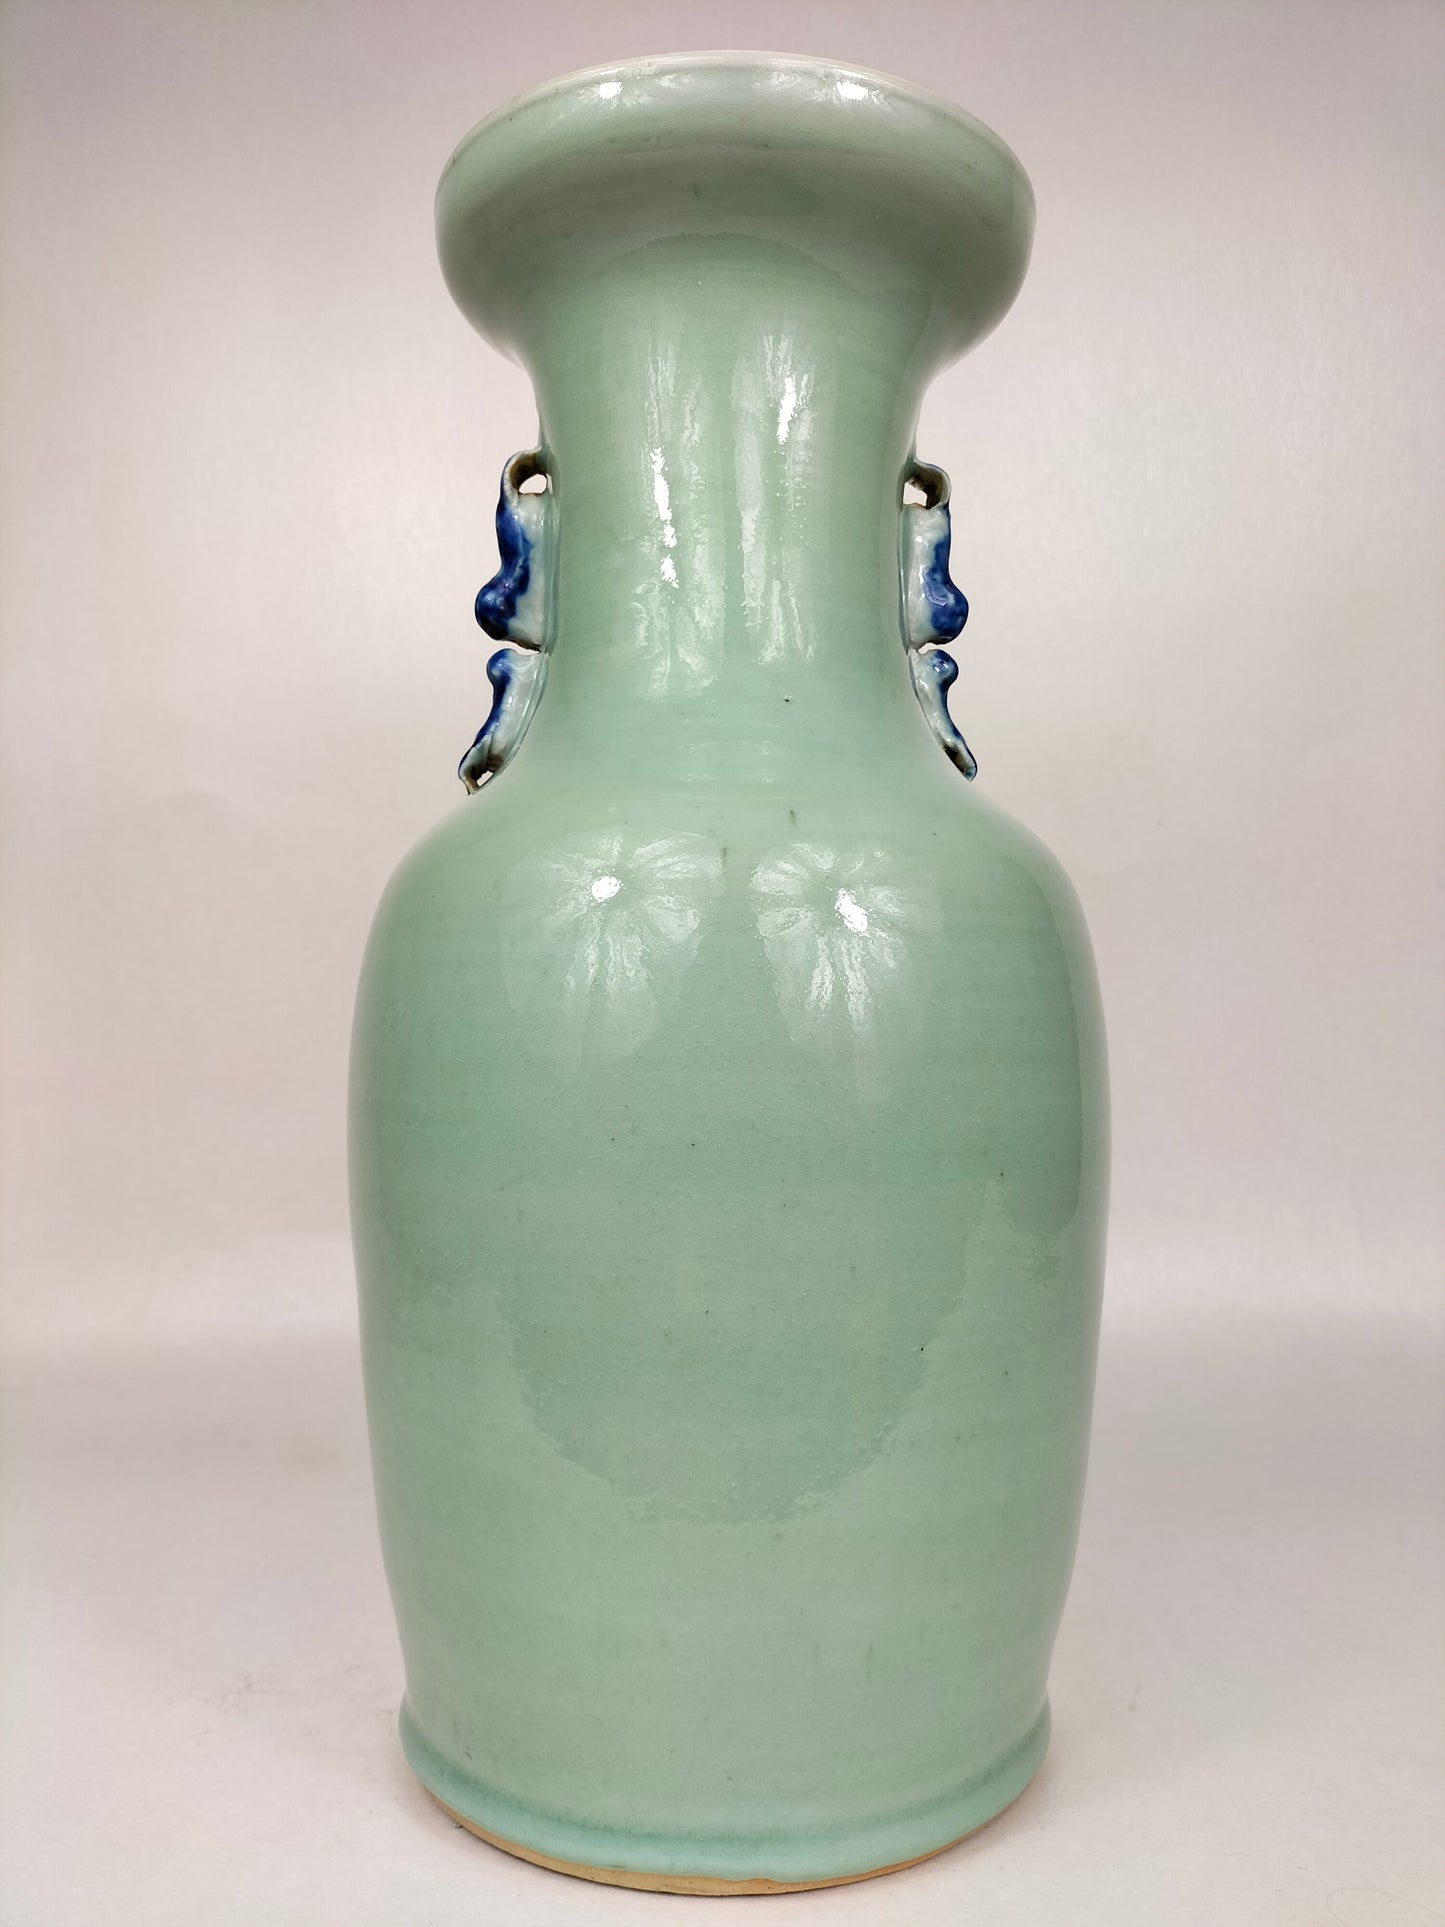 Antique Chinese celadon colored vase decorated with bird and flowers // Qing Dynasty - 19th century